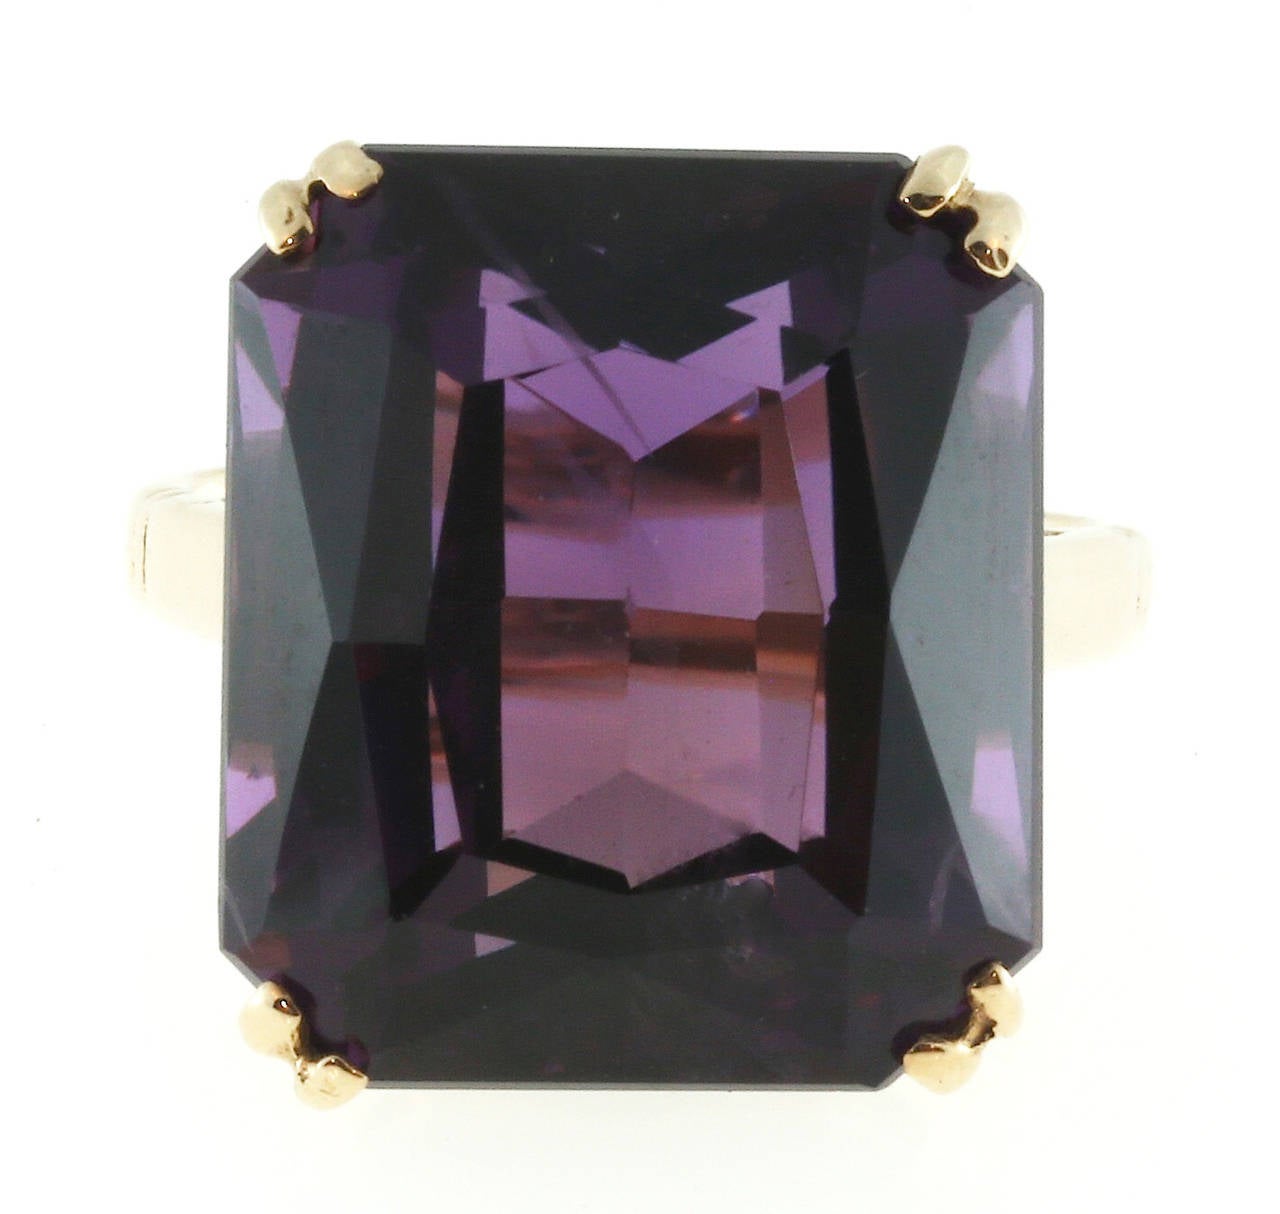 Top gem quality reddish purple 16.02ct  Amethyst, in its original 9k pink gold custom made ring.

1 Bright well cut and well-polished 16 x 14mm top gem slightly reddish purple genuine untreated Amethyst, approx. total weight 16.02cts
Stamped: